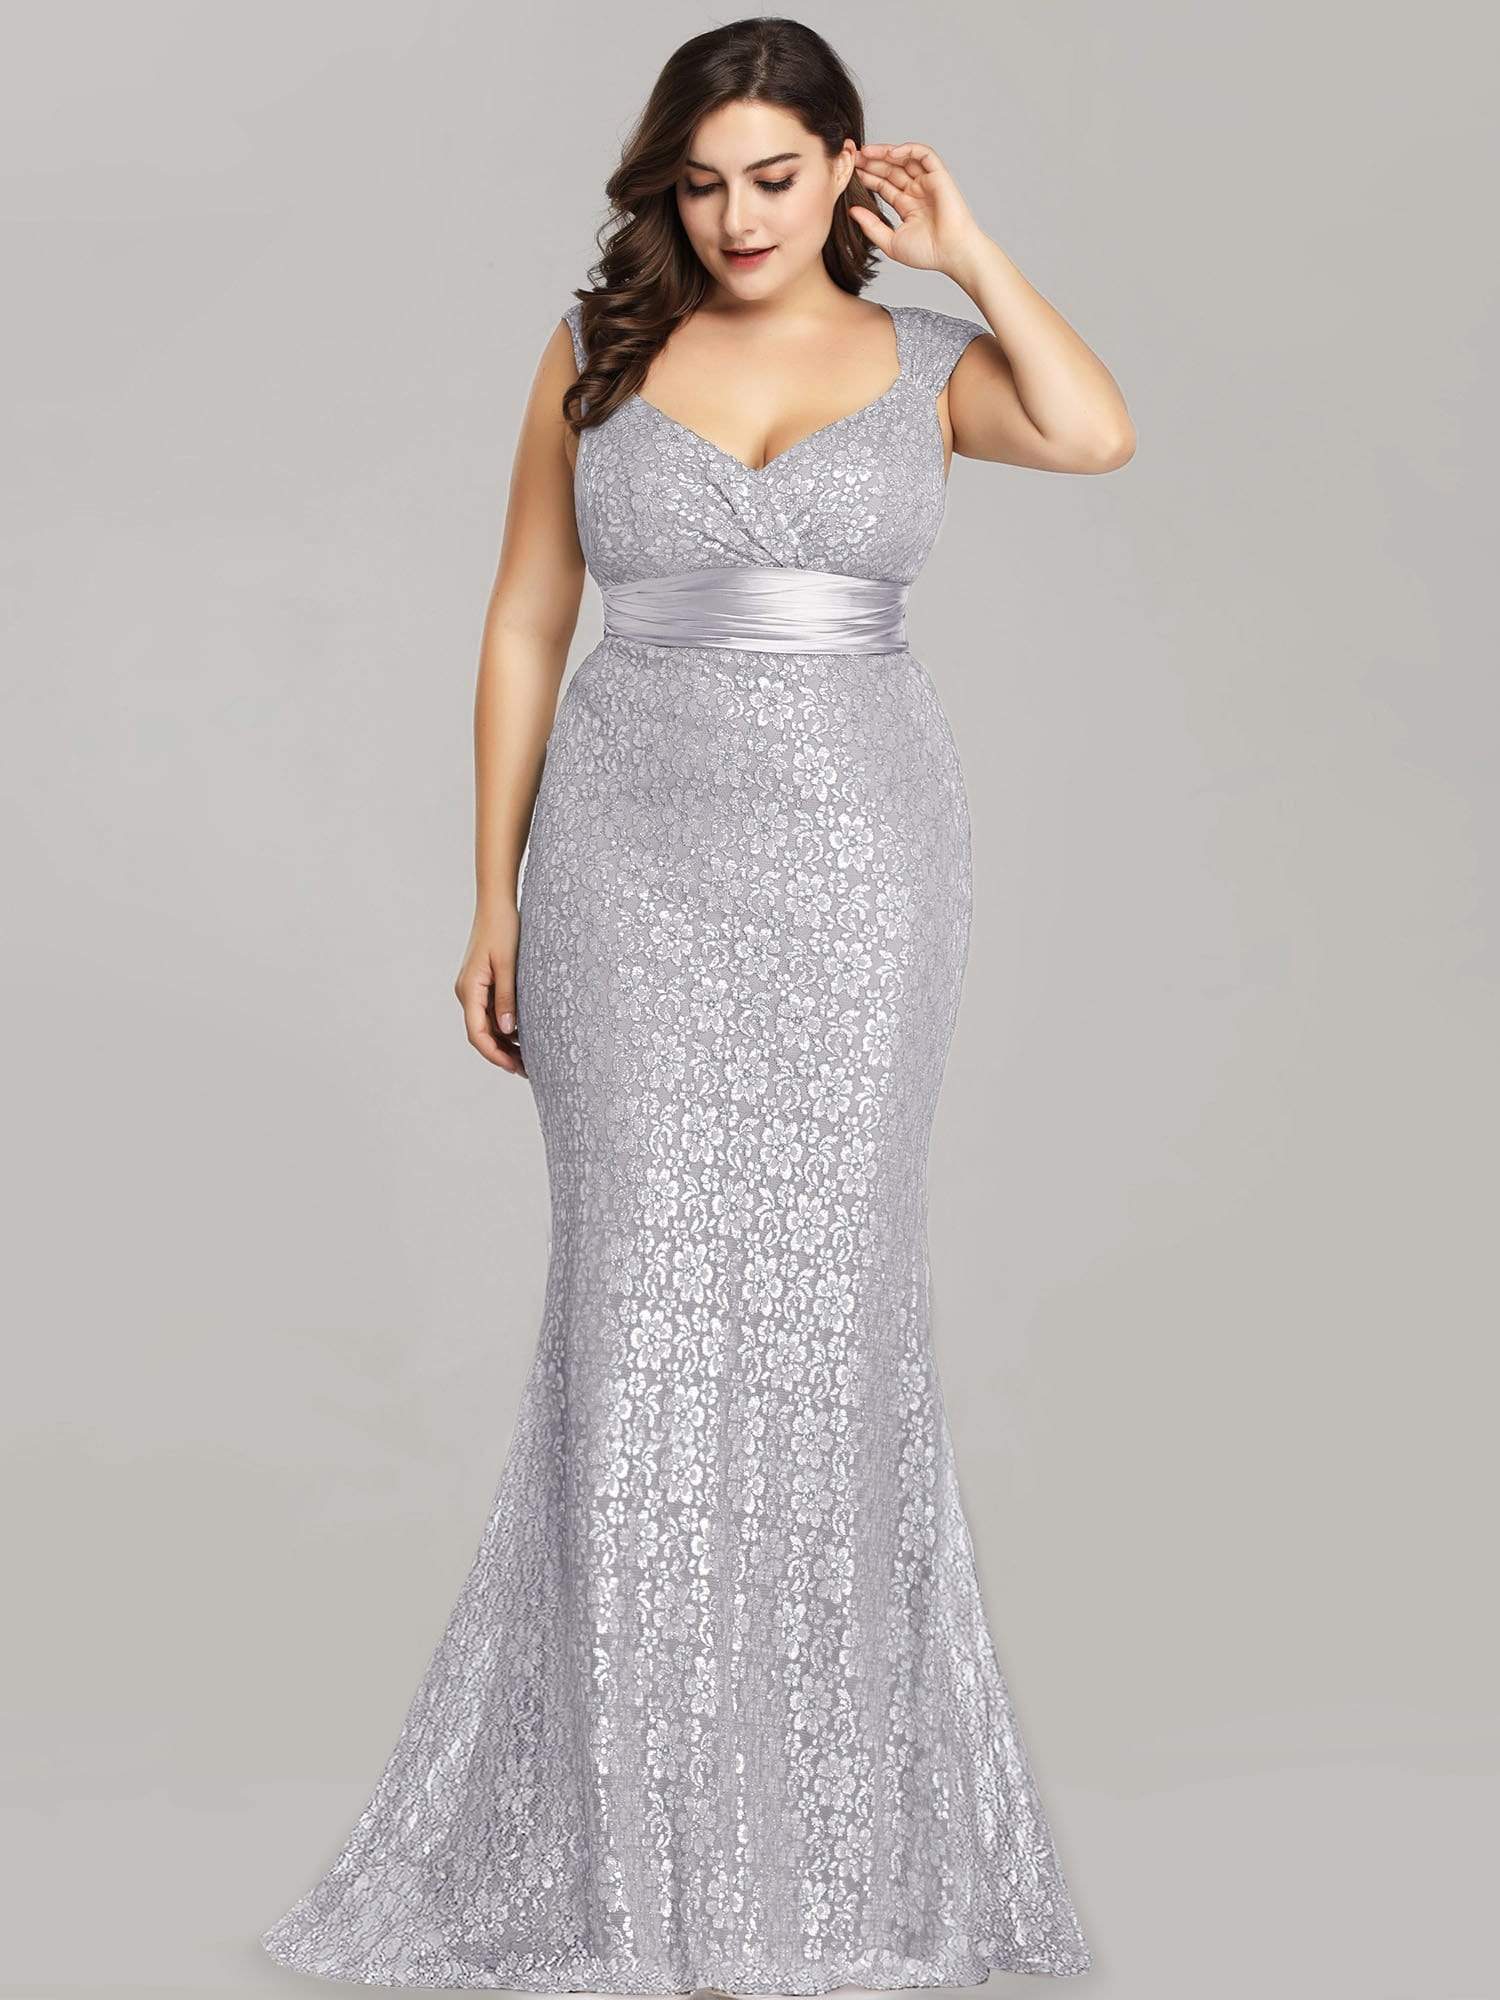 Plus Size Fishtail Evening Party Dresses for Women with Cap Sleeve